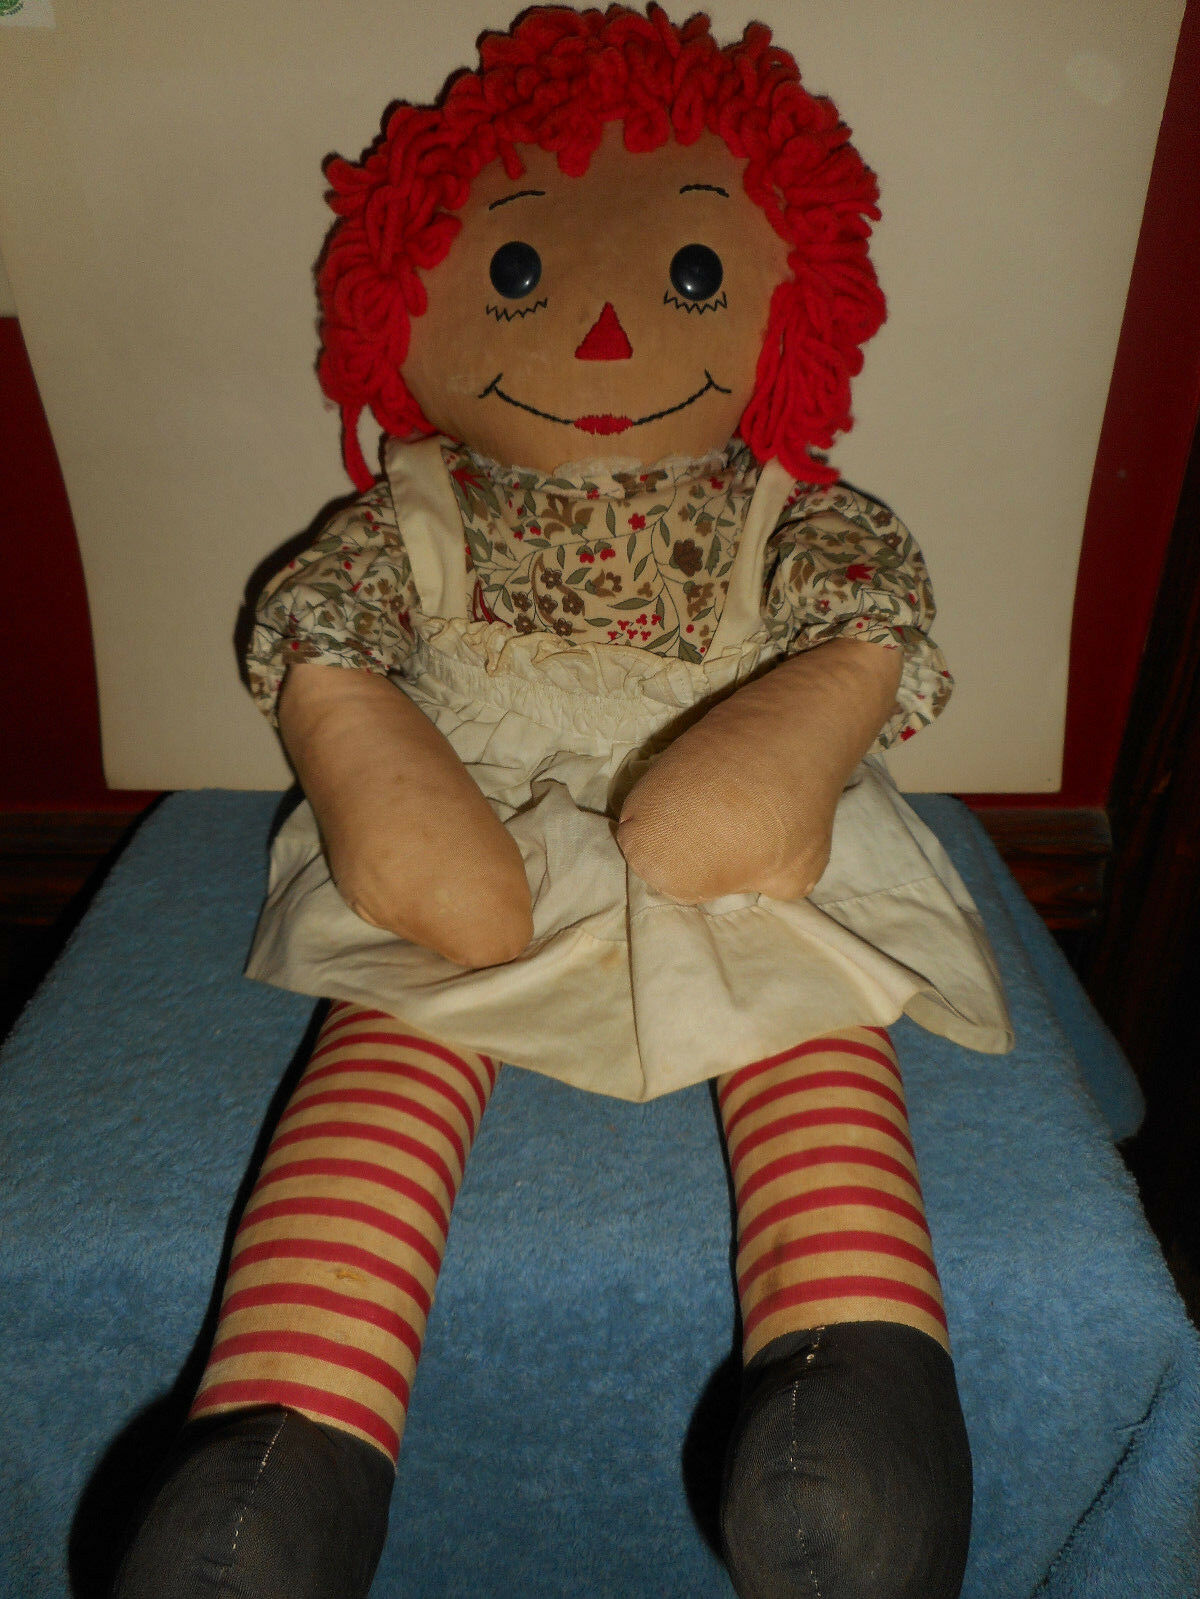 Vintage 1950's RAGGEDY ANN Doll 23" Hand Embroidered Face Black Button Eyes